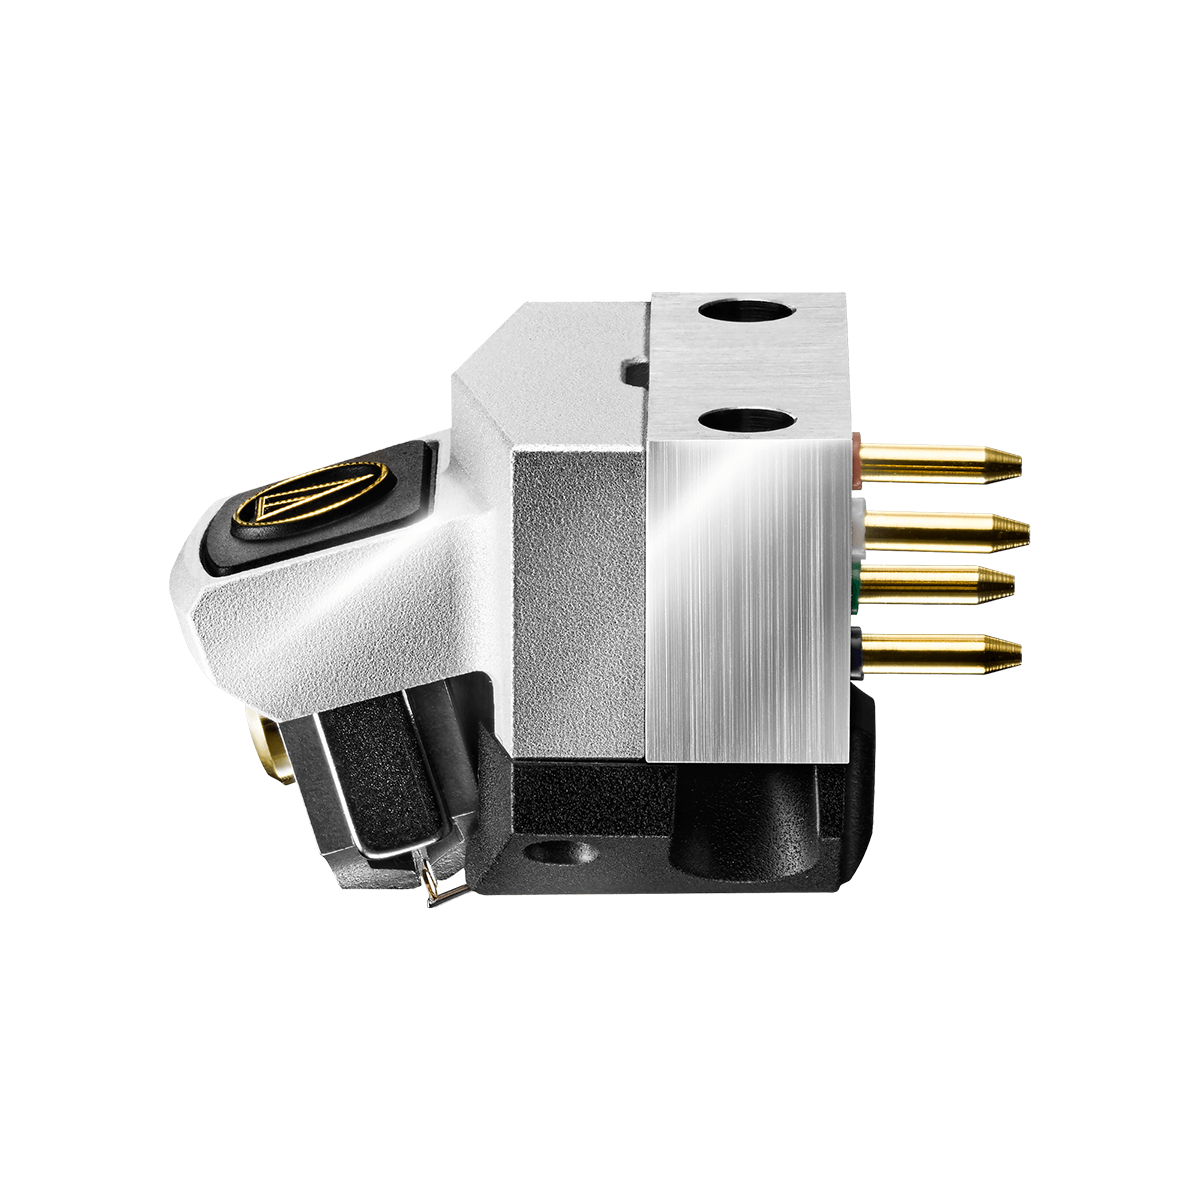 Audio-Technica AT-ART1000 Moving Coil Cartridge